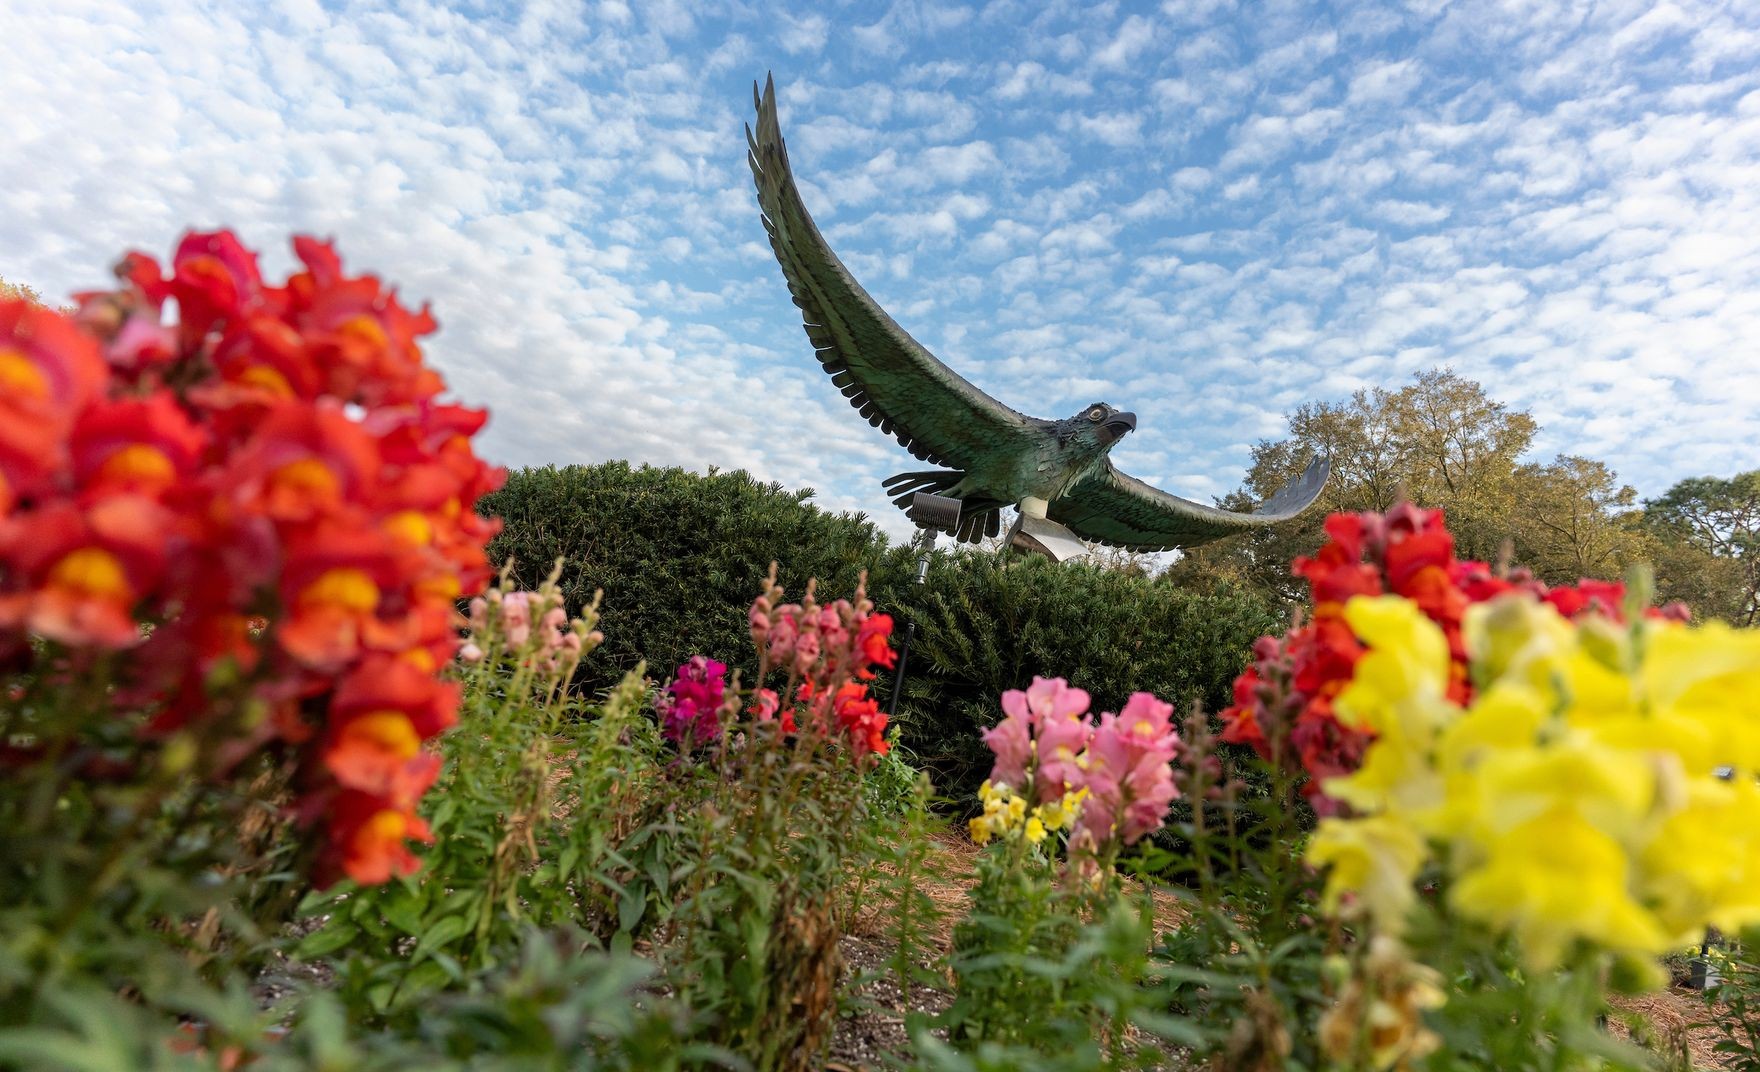 A view from below of the Soaring Seahawk sculpture with colorful flowers blooming at its base